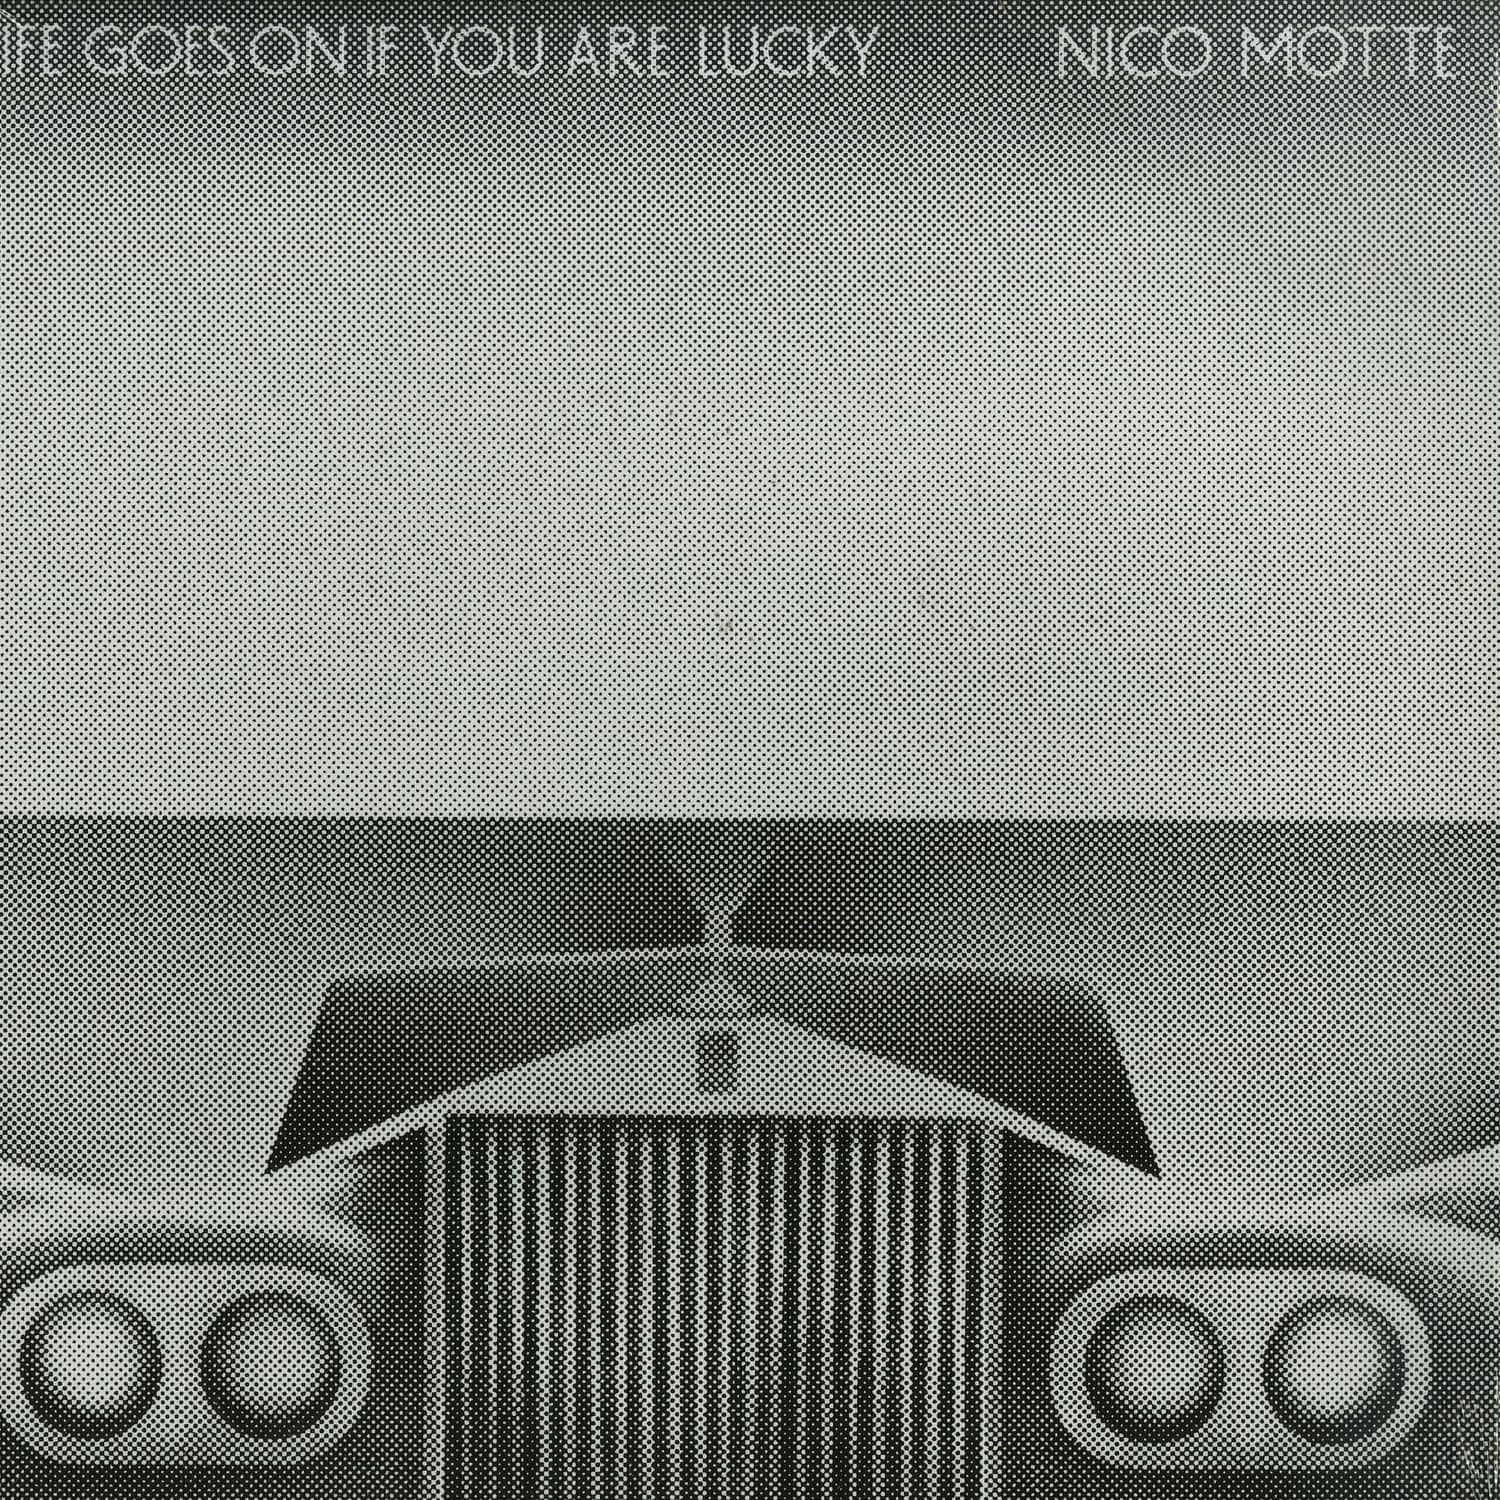 Nico Motte - LIFE GOES ON IF YOU ARE LUCKY